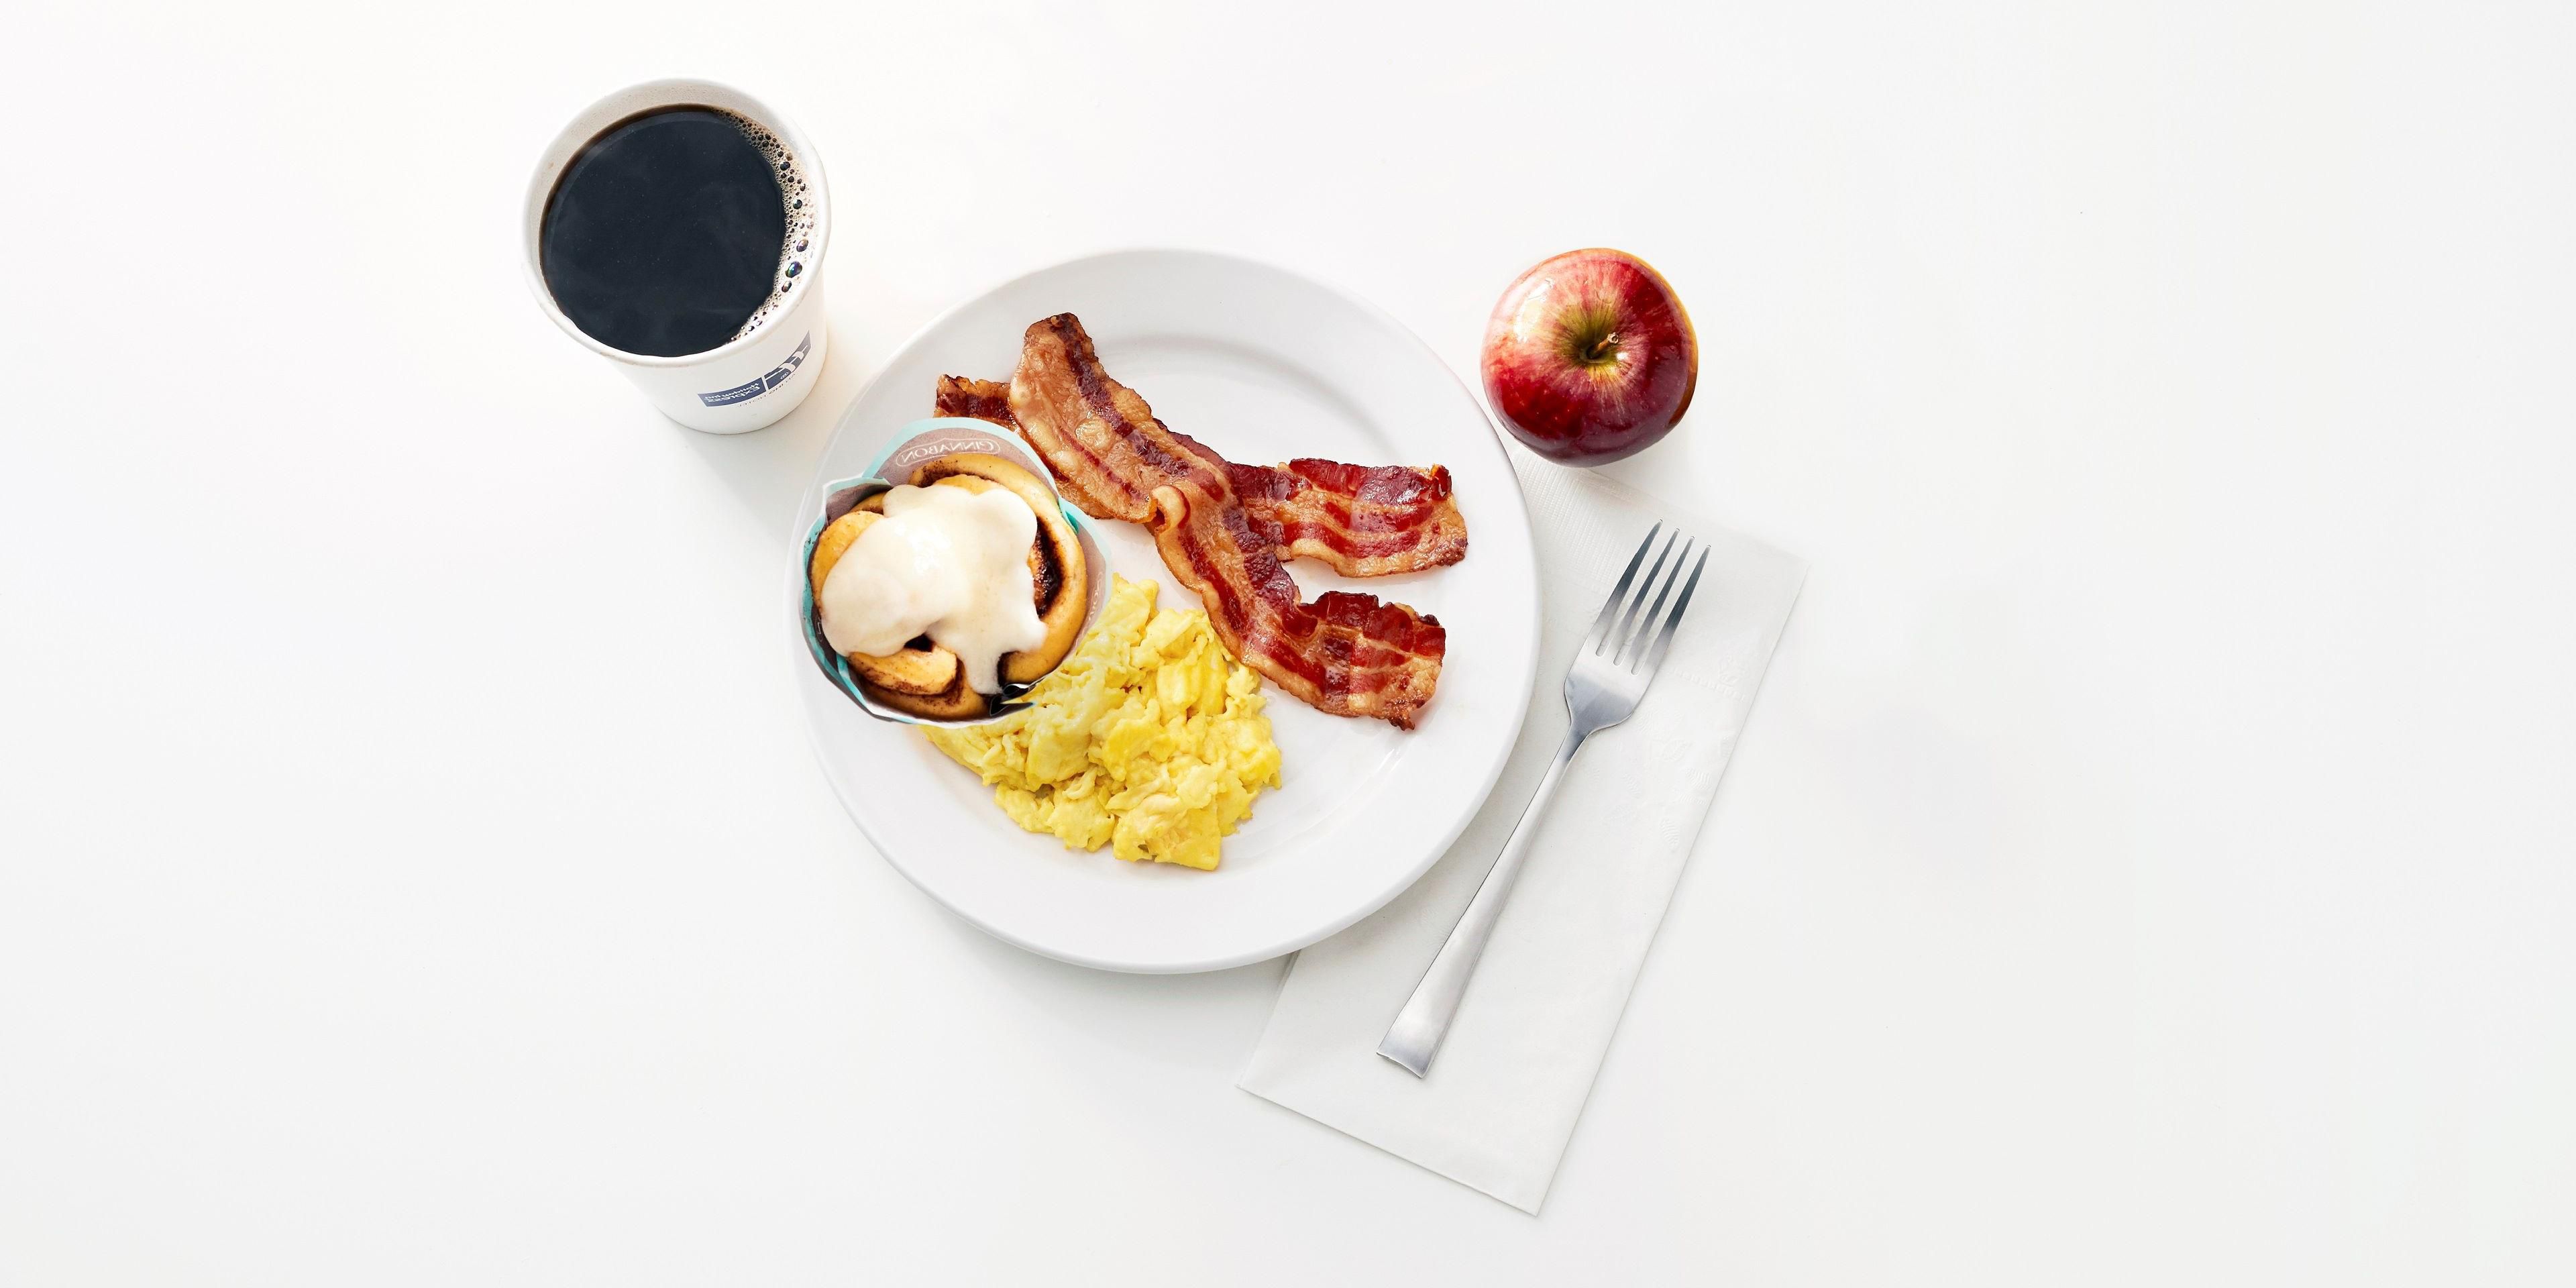 Kick start your day with our free Express Start Breakfast, with grab ‘n’ go options and favorites such as eggs and bacon, hot pancakes, our signature cinnamon rolls and fresh coffee. Offered from 6:30 AM to 9:30 AM.